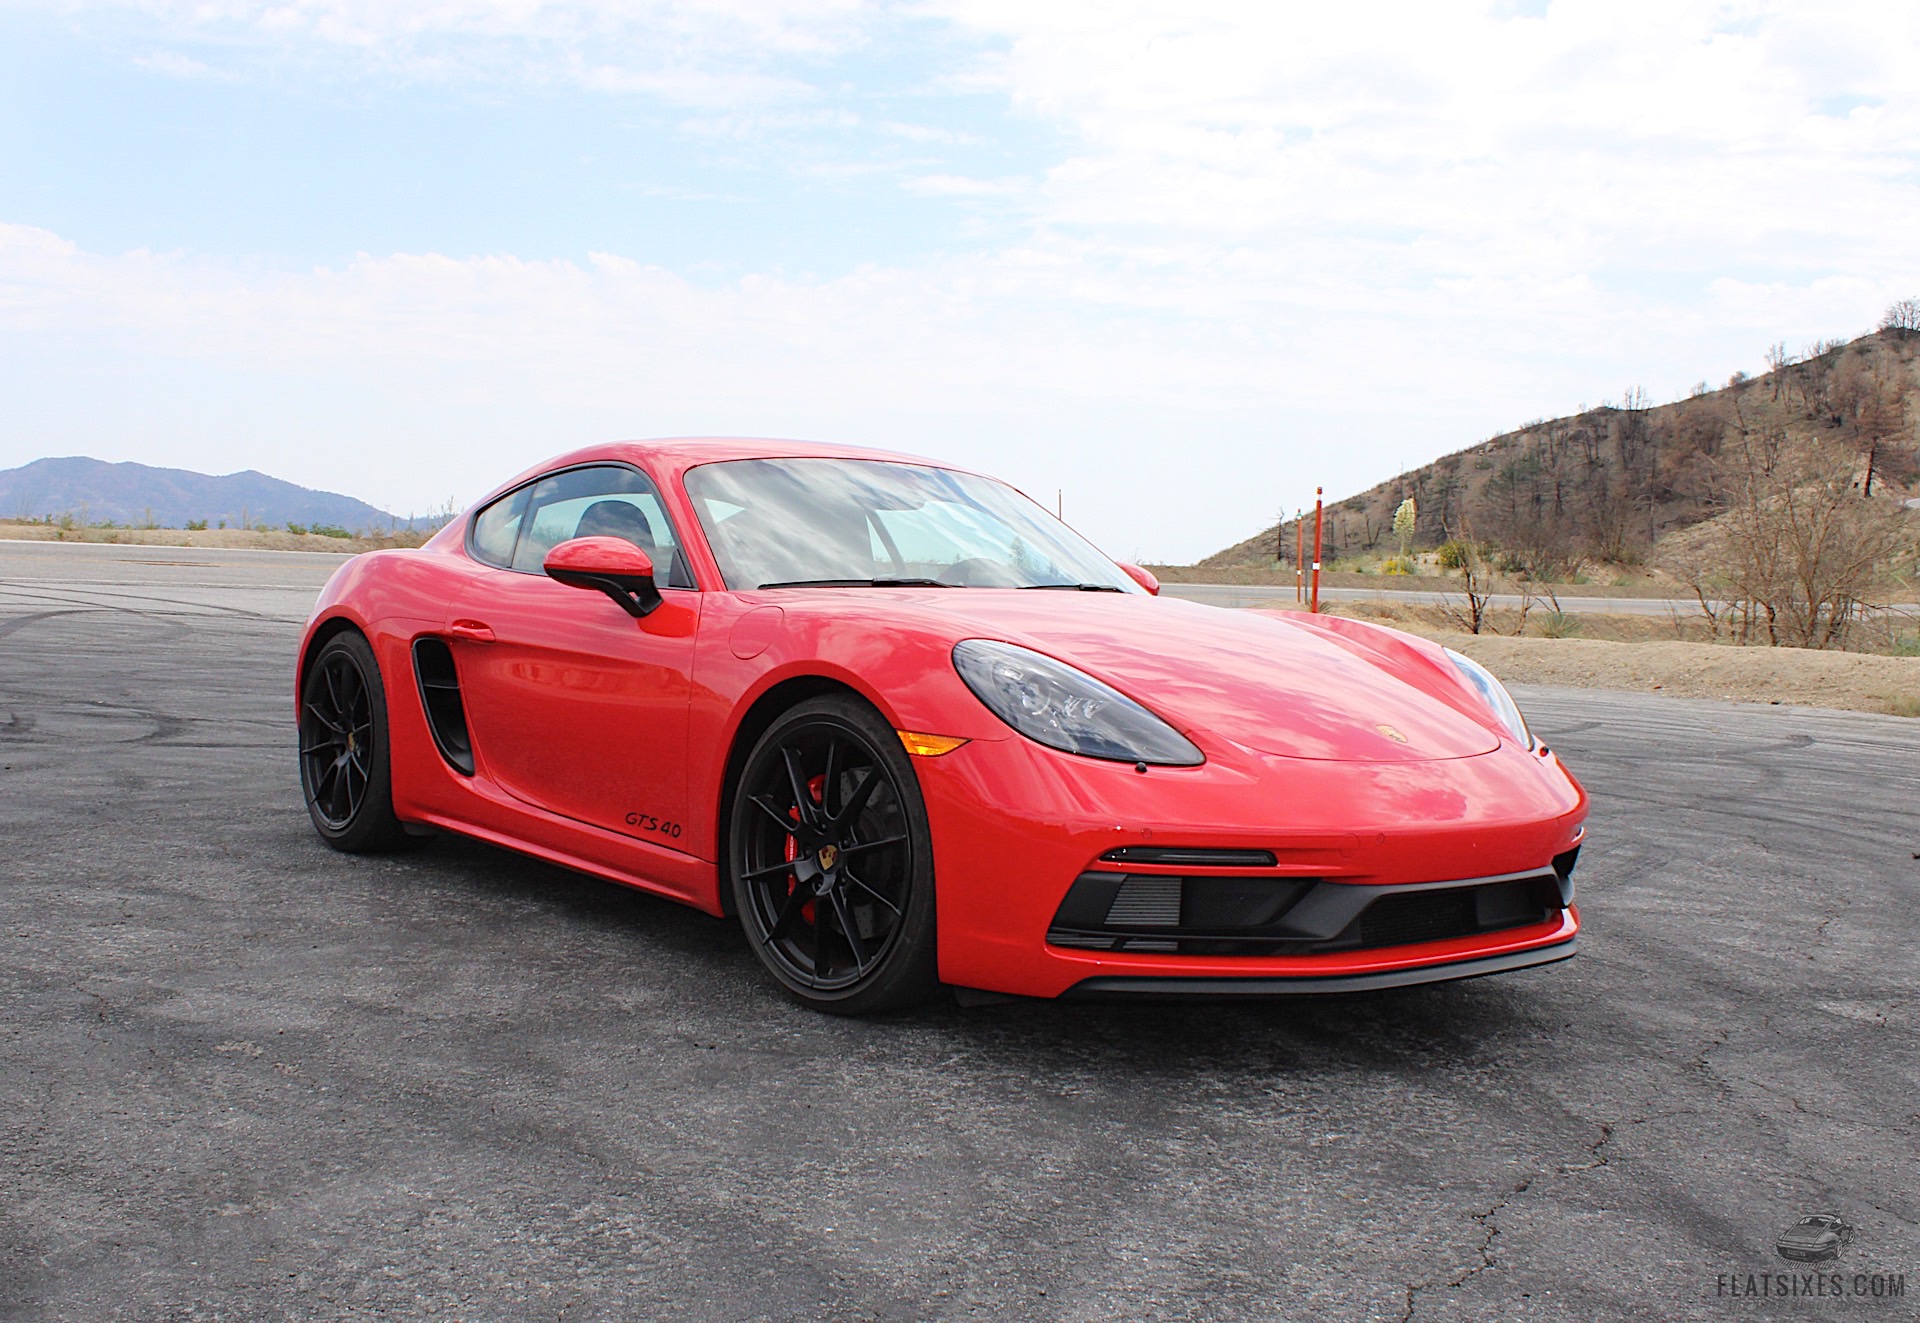 2021 Porsche 718 Cayman GTS 4.0 review Nearly everything you'd want